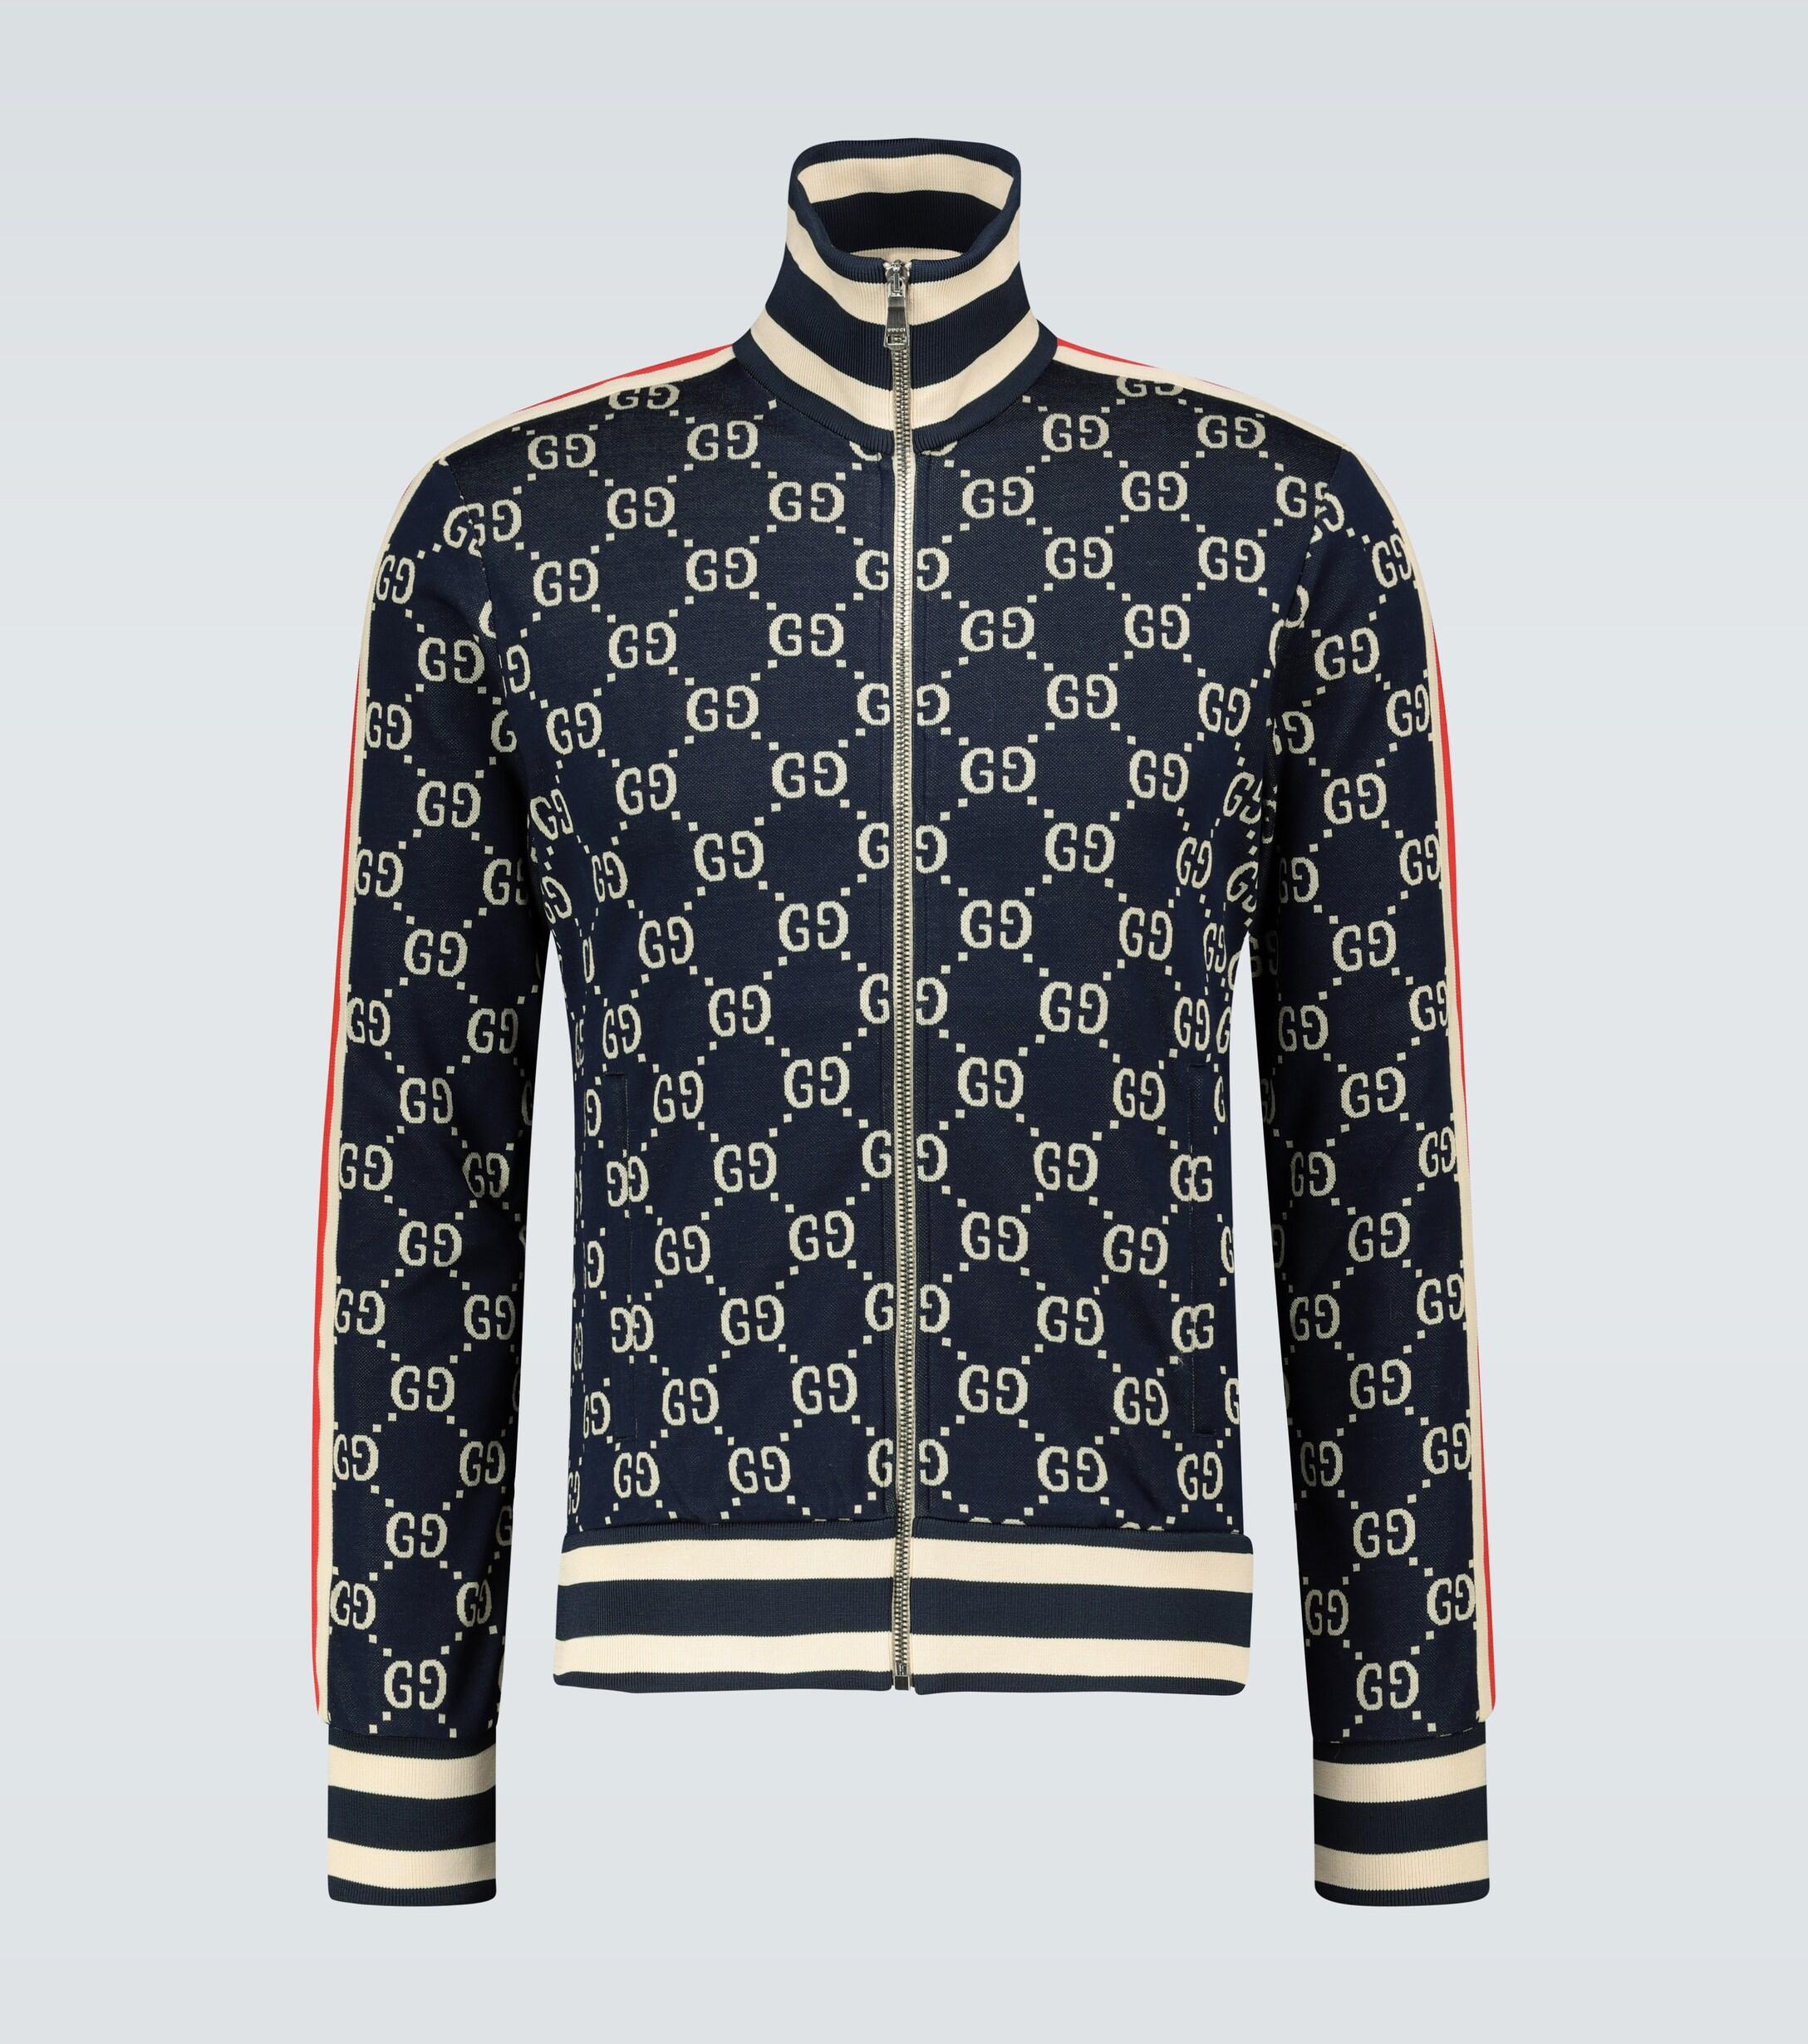 Gucci GG Jacquard Zipped Jacket in Blue for Men - Lyst